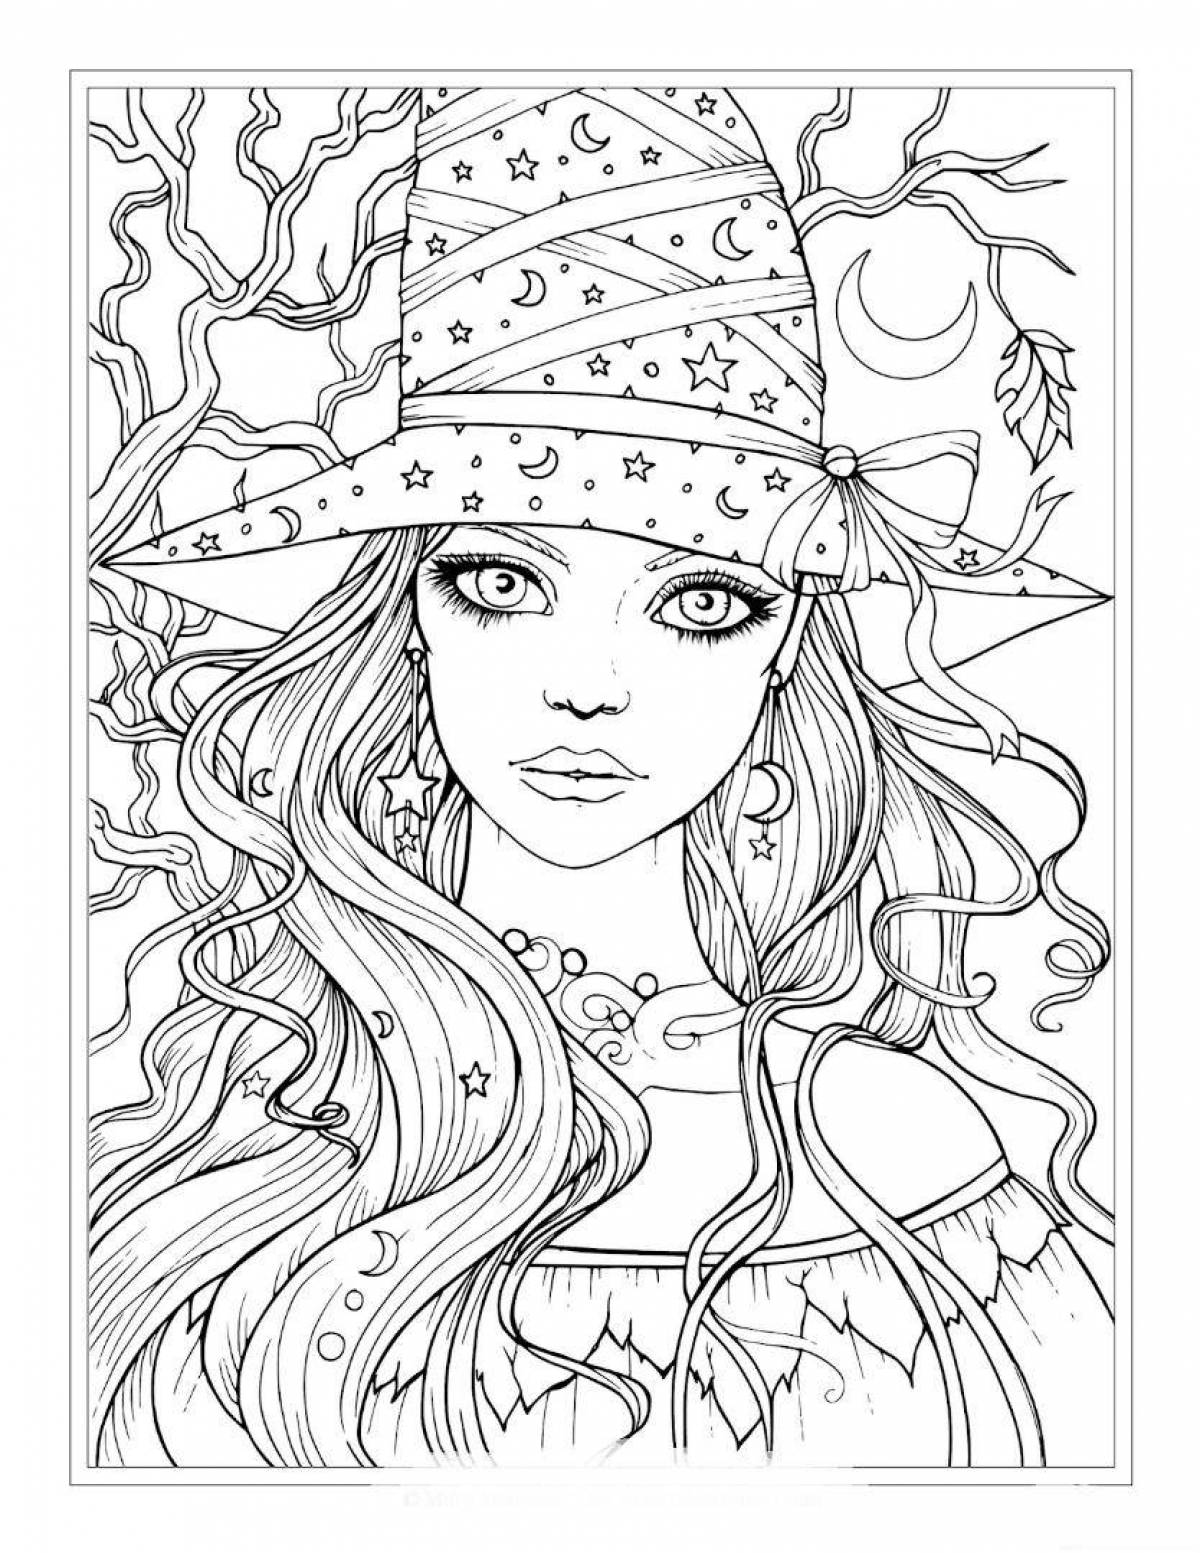 Glitter coloring book for girls 9-10 years old